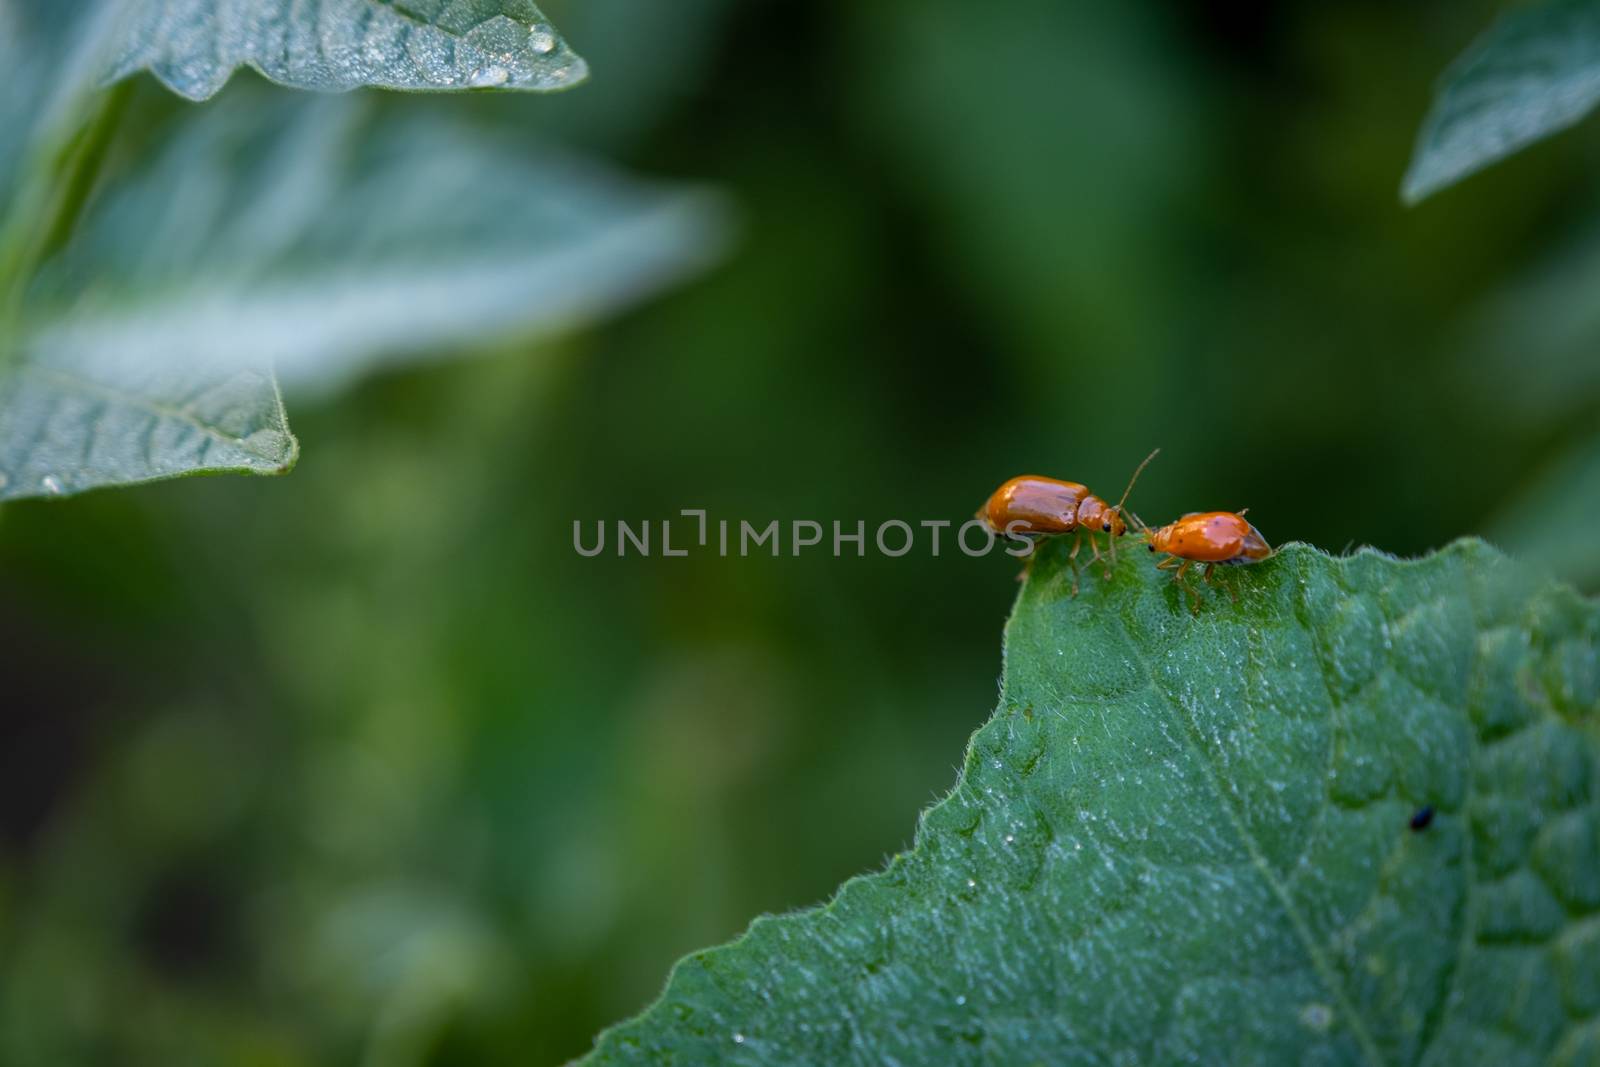 Couple of ladybugs on a Pumpkin leaves over green background by peerapixs